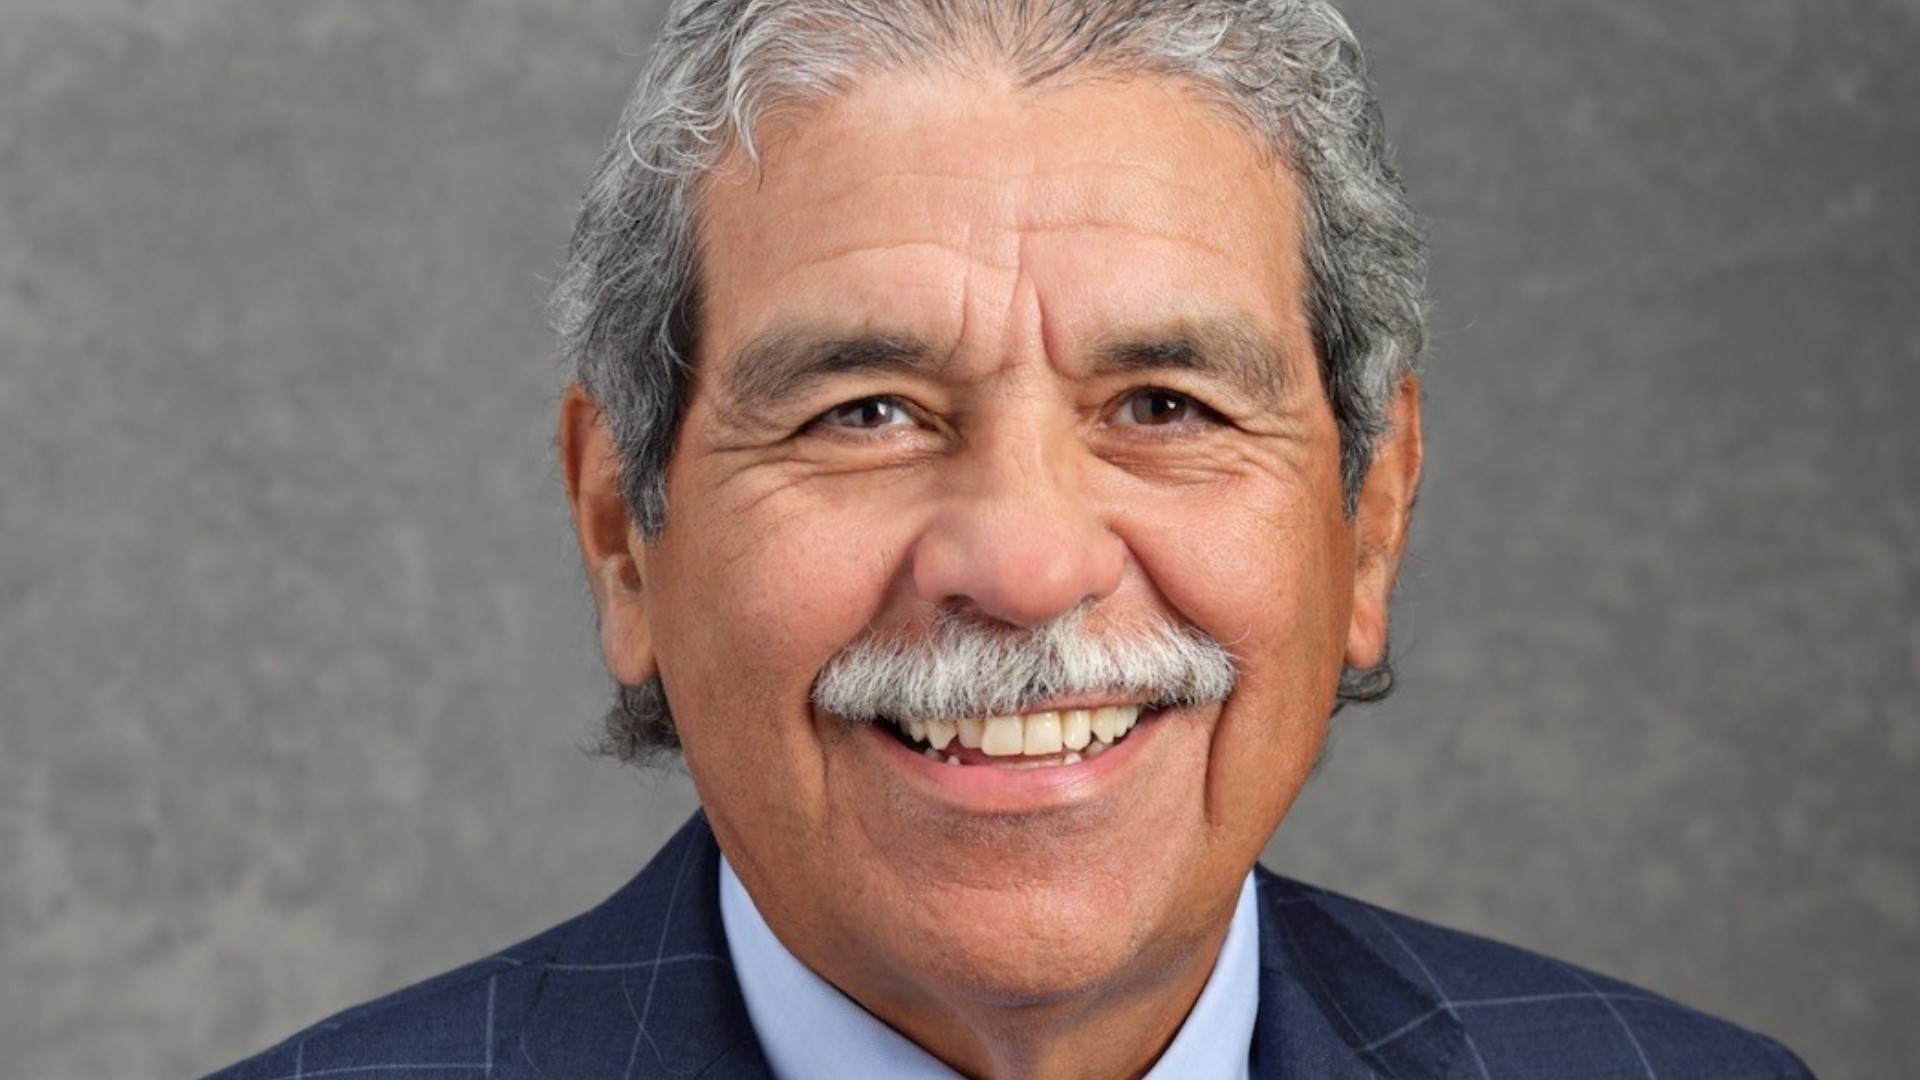 Michael Hinojosa spent two stints as superintendent of Texas' second-largest school district, the first from 2005-2011. He returned to DISD in 2015.